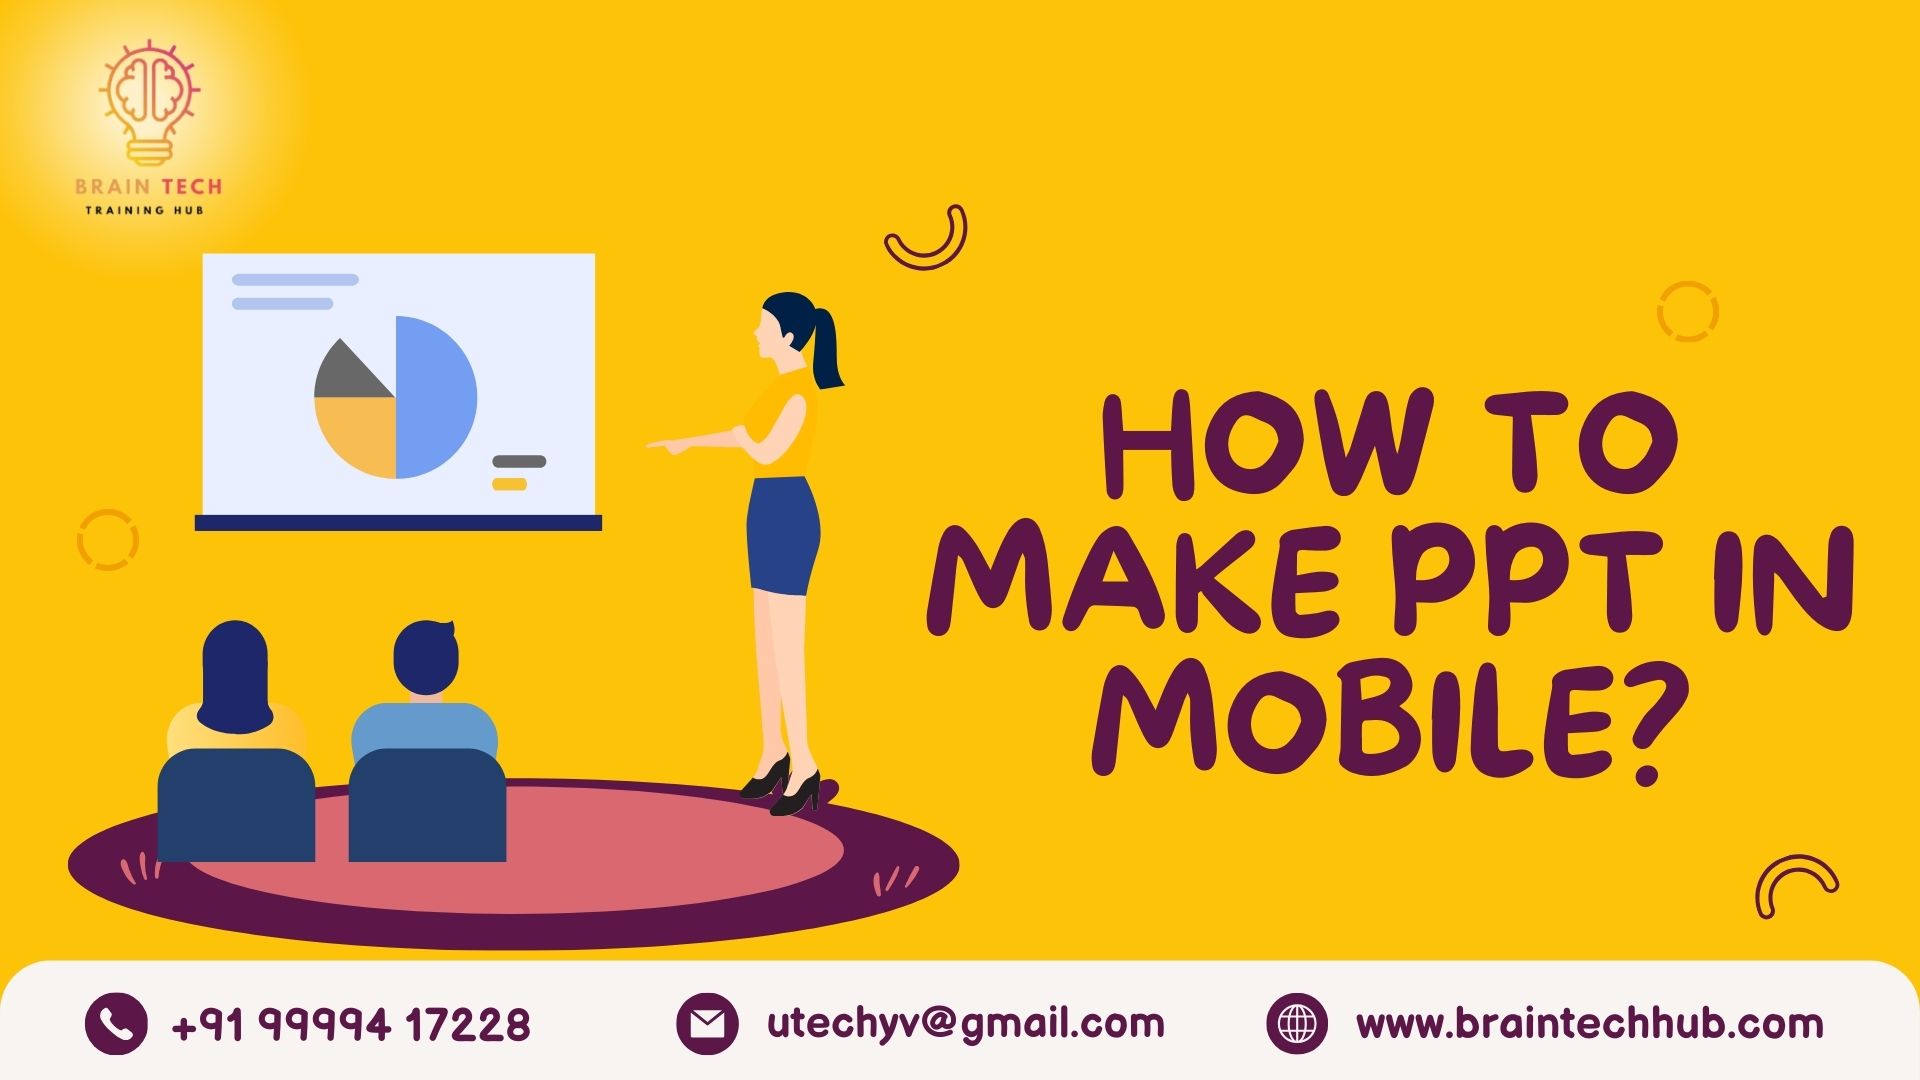 How To Make PPT In Mobile (1)